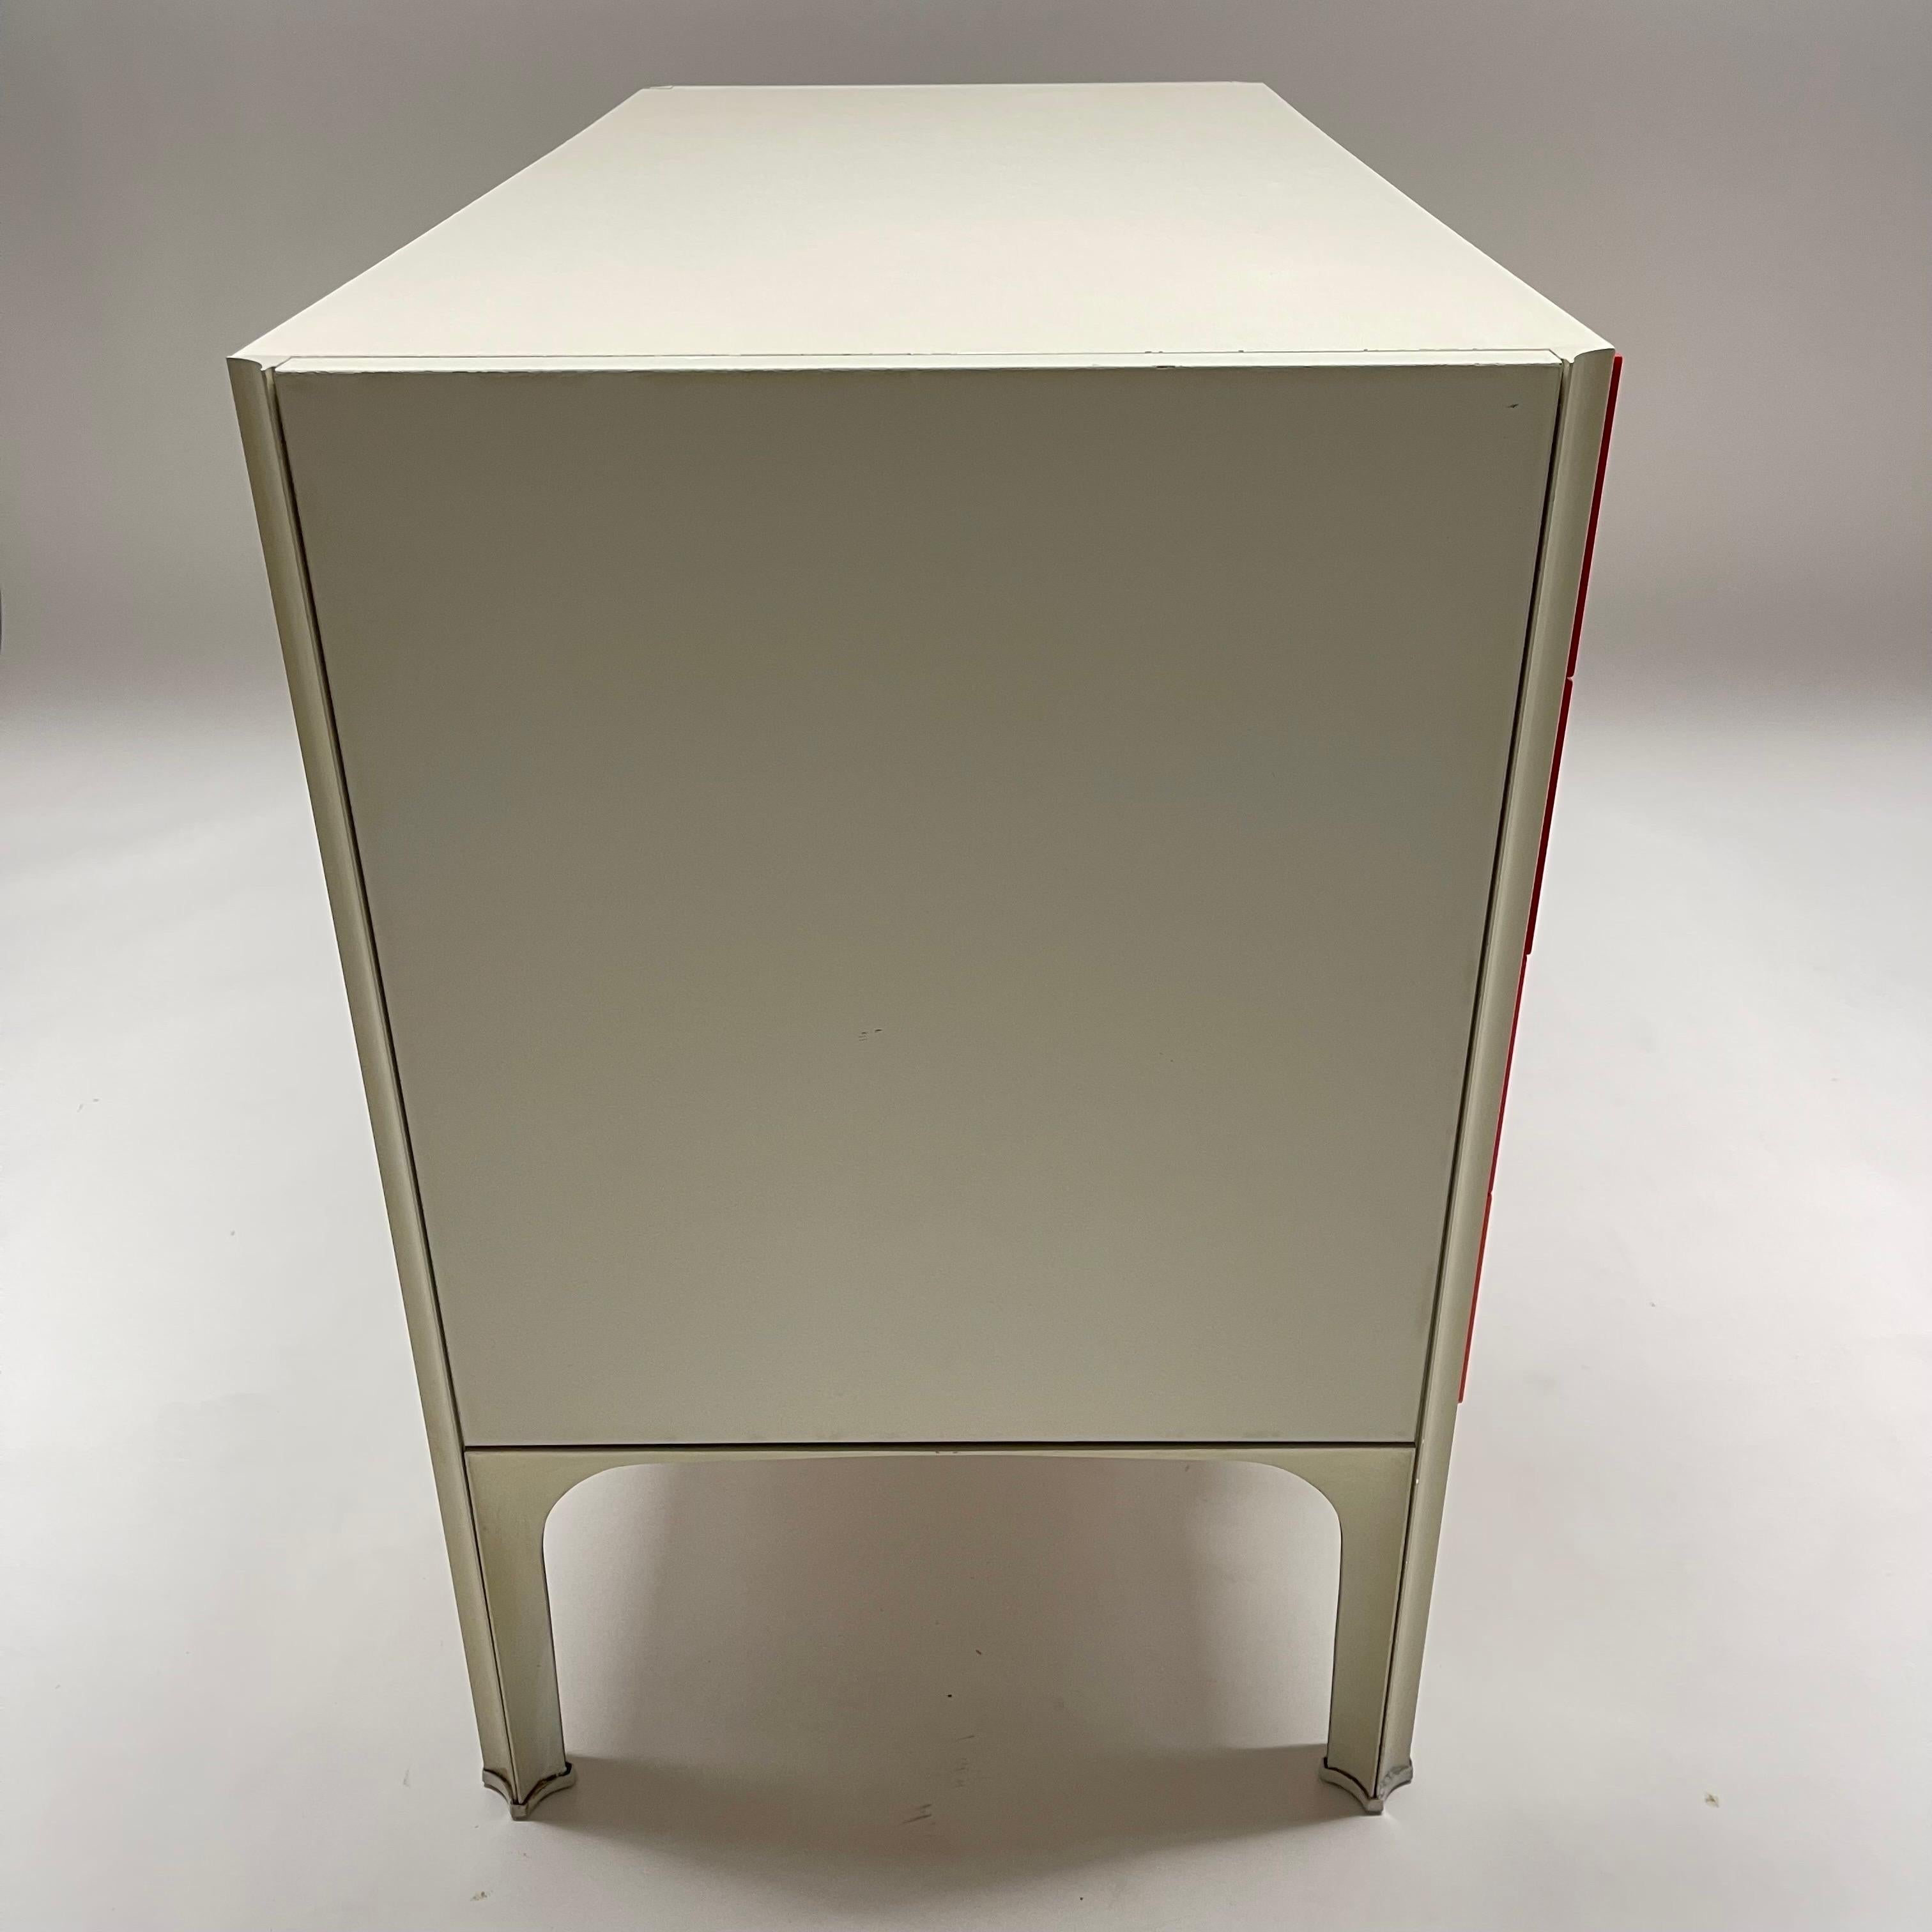 Aluminum Raymond Loewy DF-2000 Commode, Chest of Drawers, or Dresser, France, circa 1968